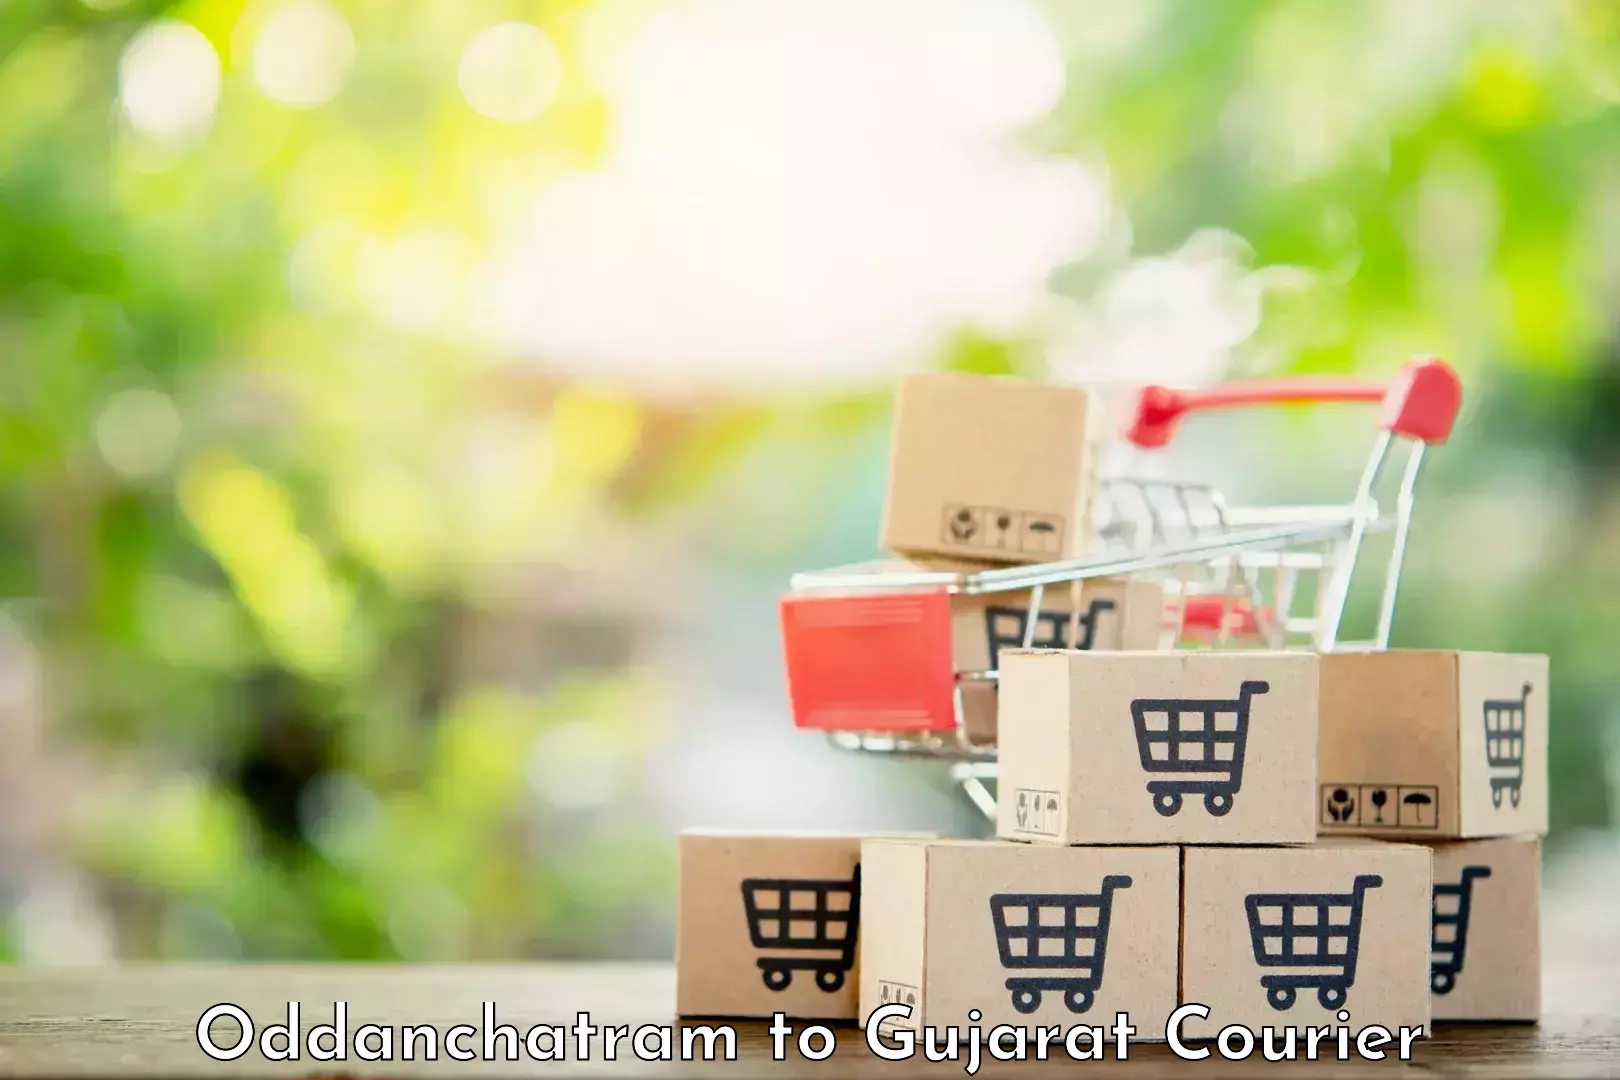 Full-service courier options in Oddanchatram to Kalavad